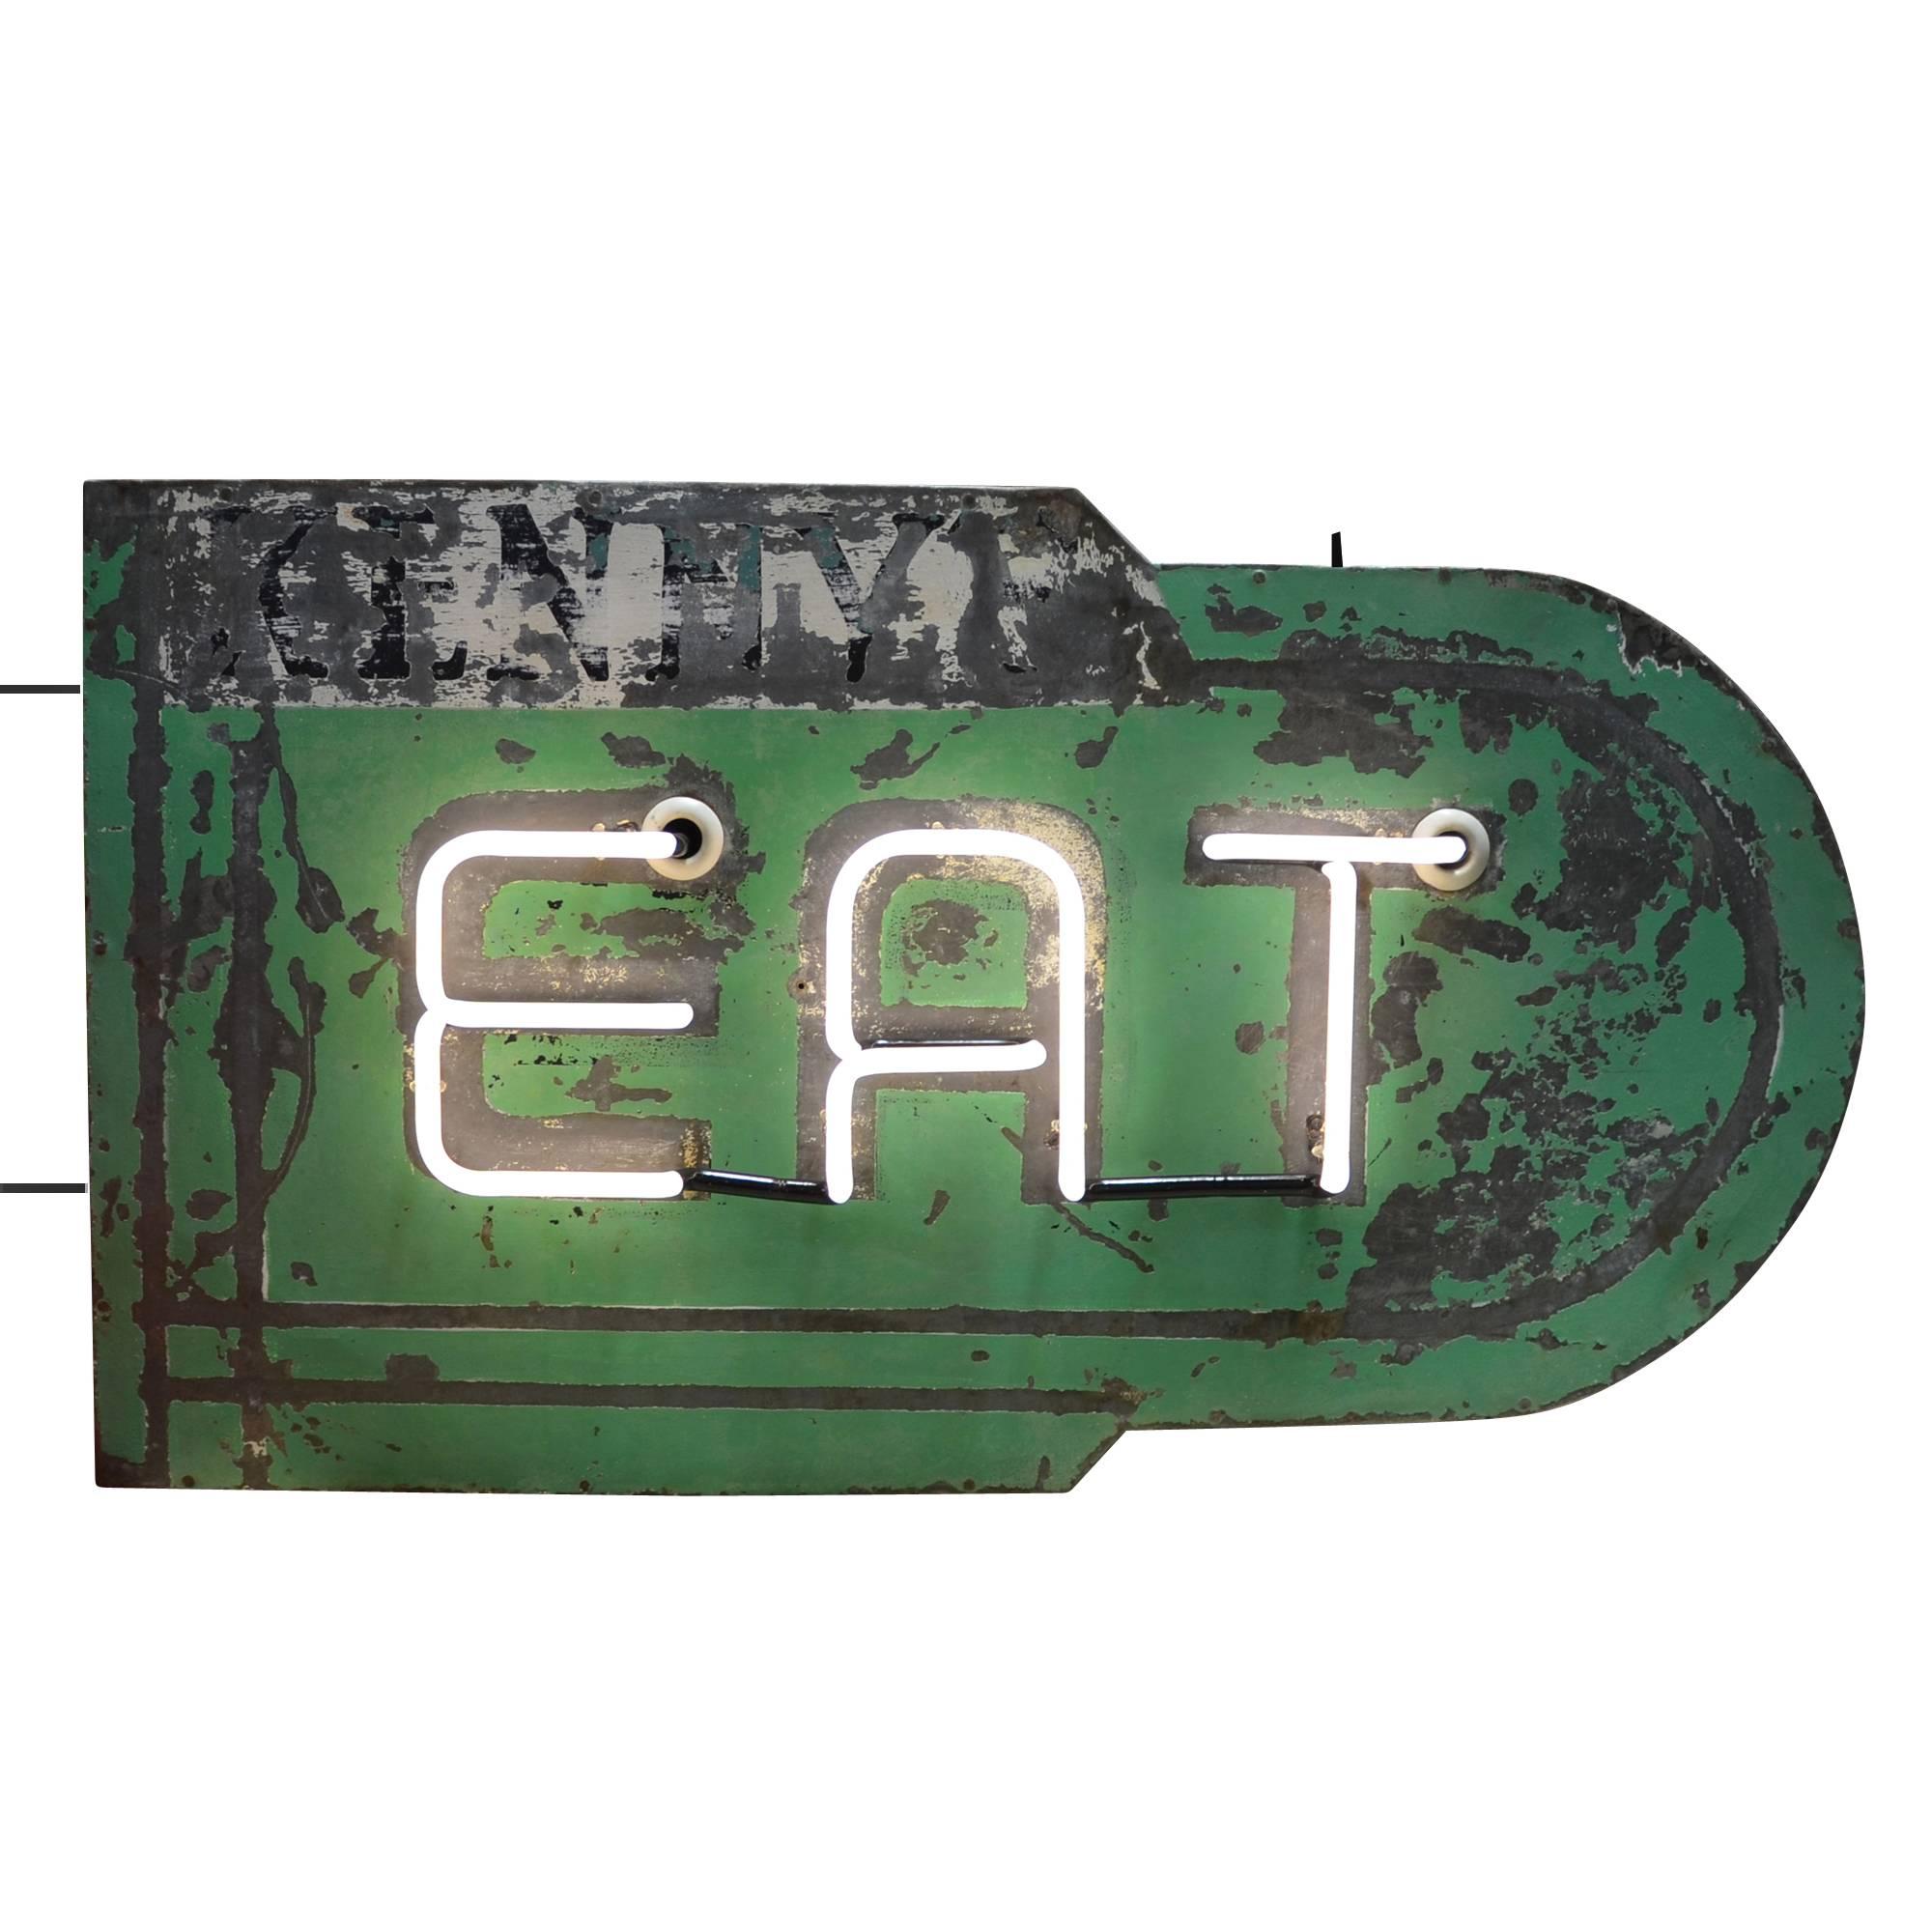 Once in a blue moon we come across a neon sign with unique, streamline character and we get very excited. This holy grail of vintage signs proudly advertises EAT for the no-nonsense blue-collar joe, instantly evoking an entire vanished era in that